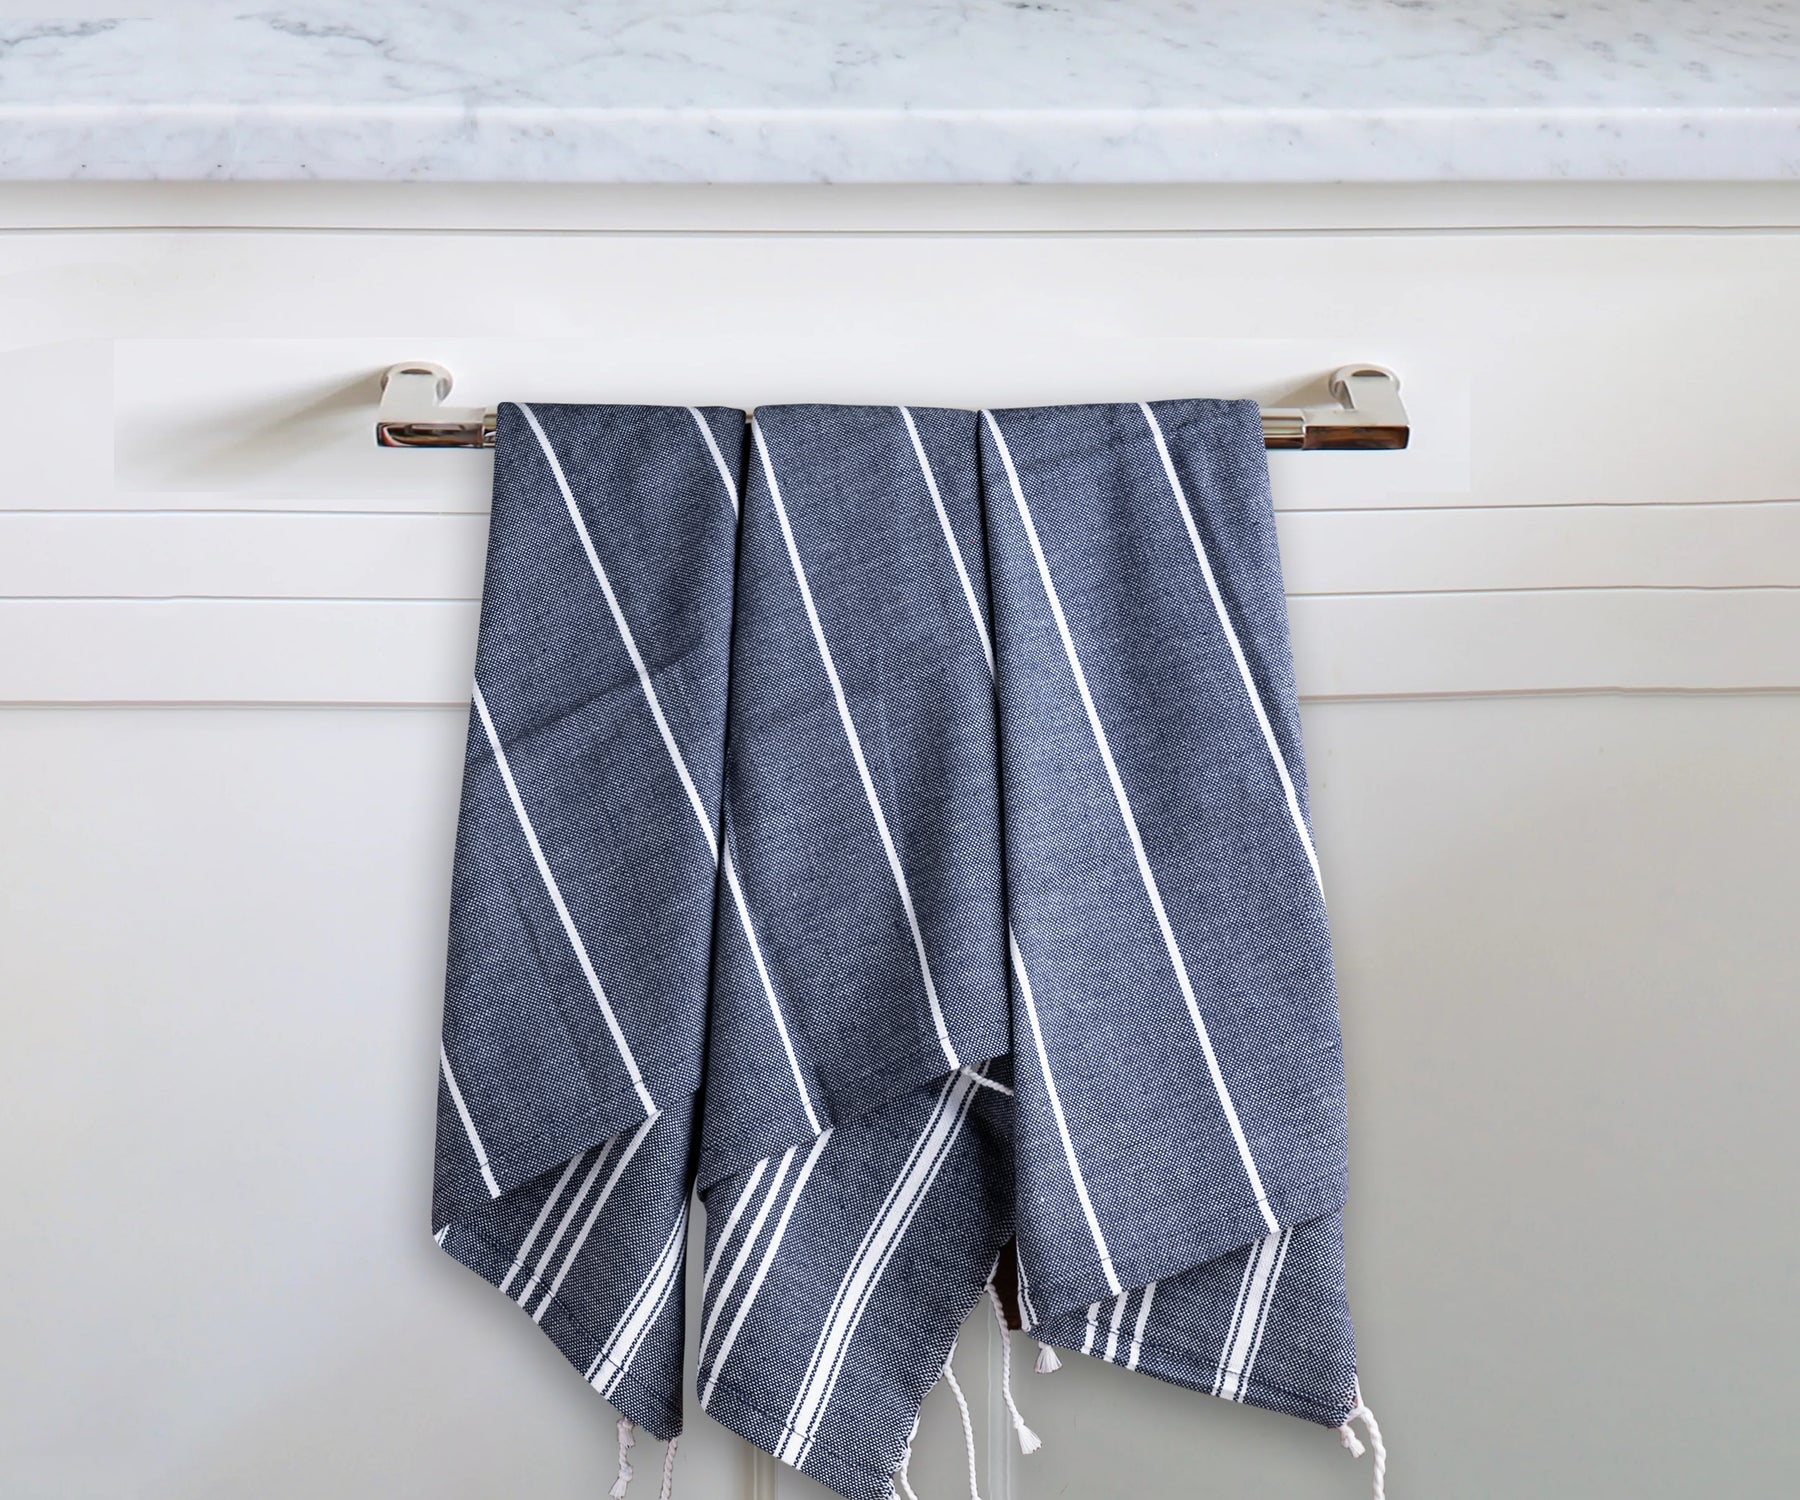 Classic Dark Kitchen Dish Towels With Hanging Loop – Heavy Duty